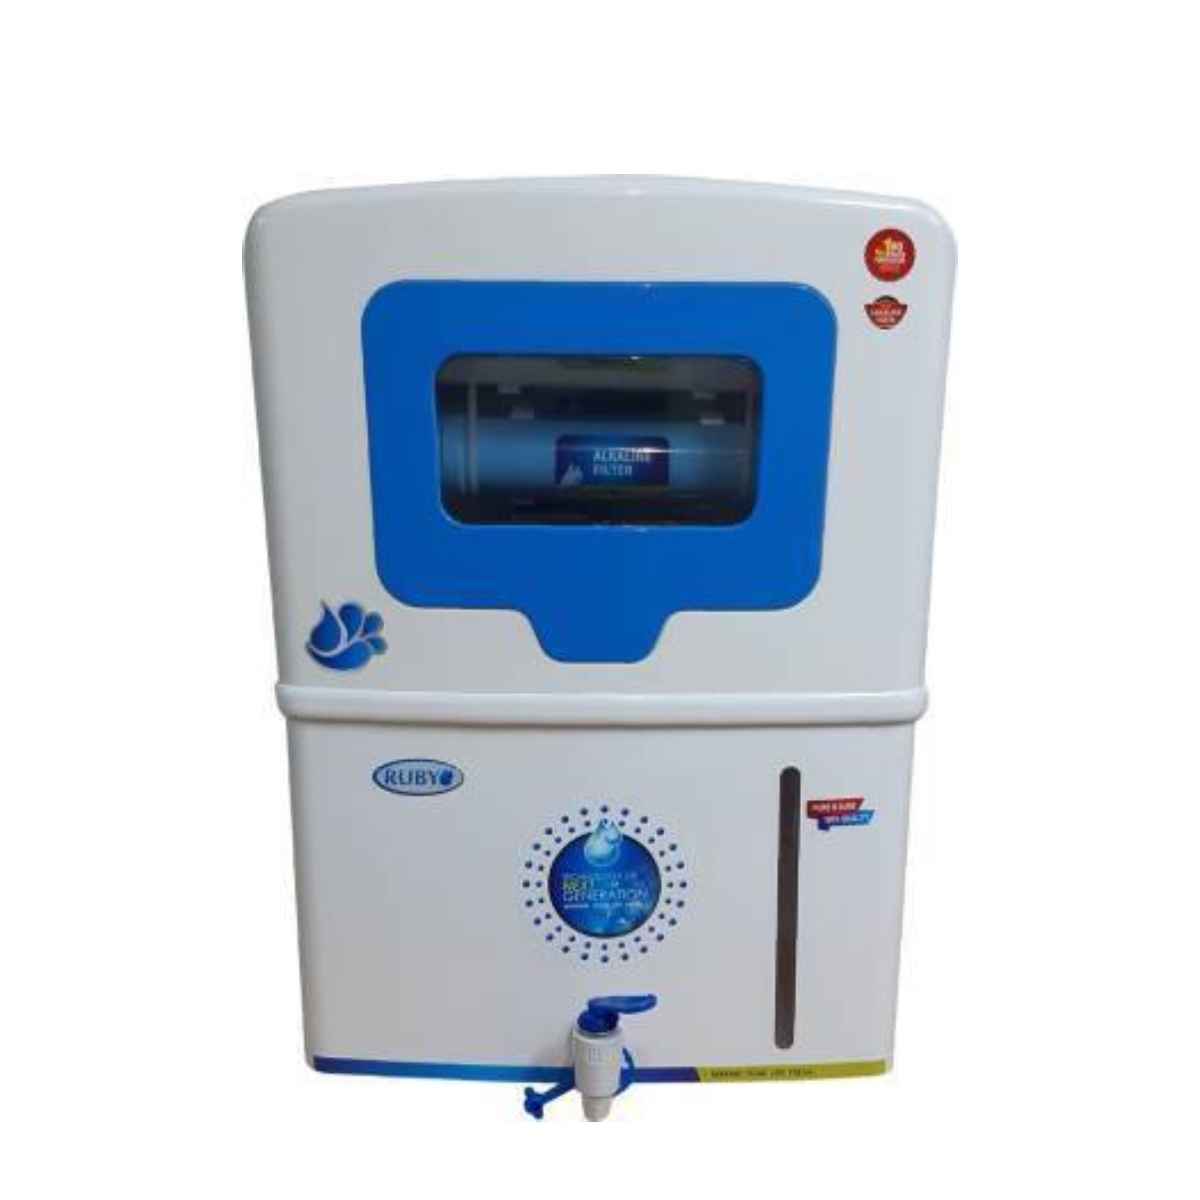 Ruby Economical RO with Alkaline 5 Stage purification 12 L RO Water Purifier